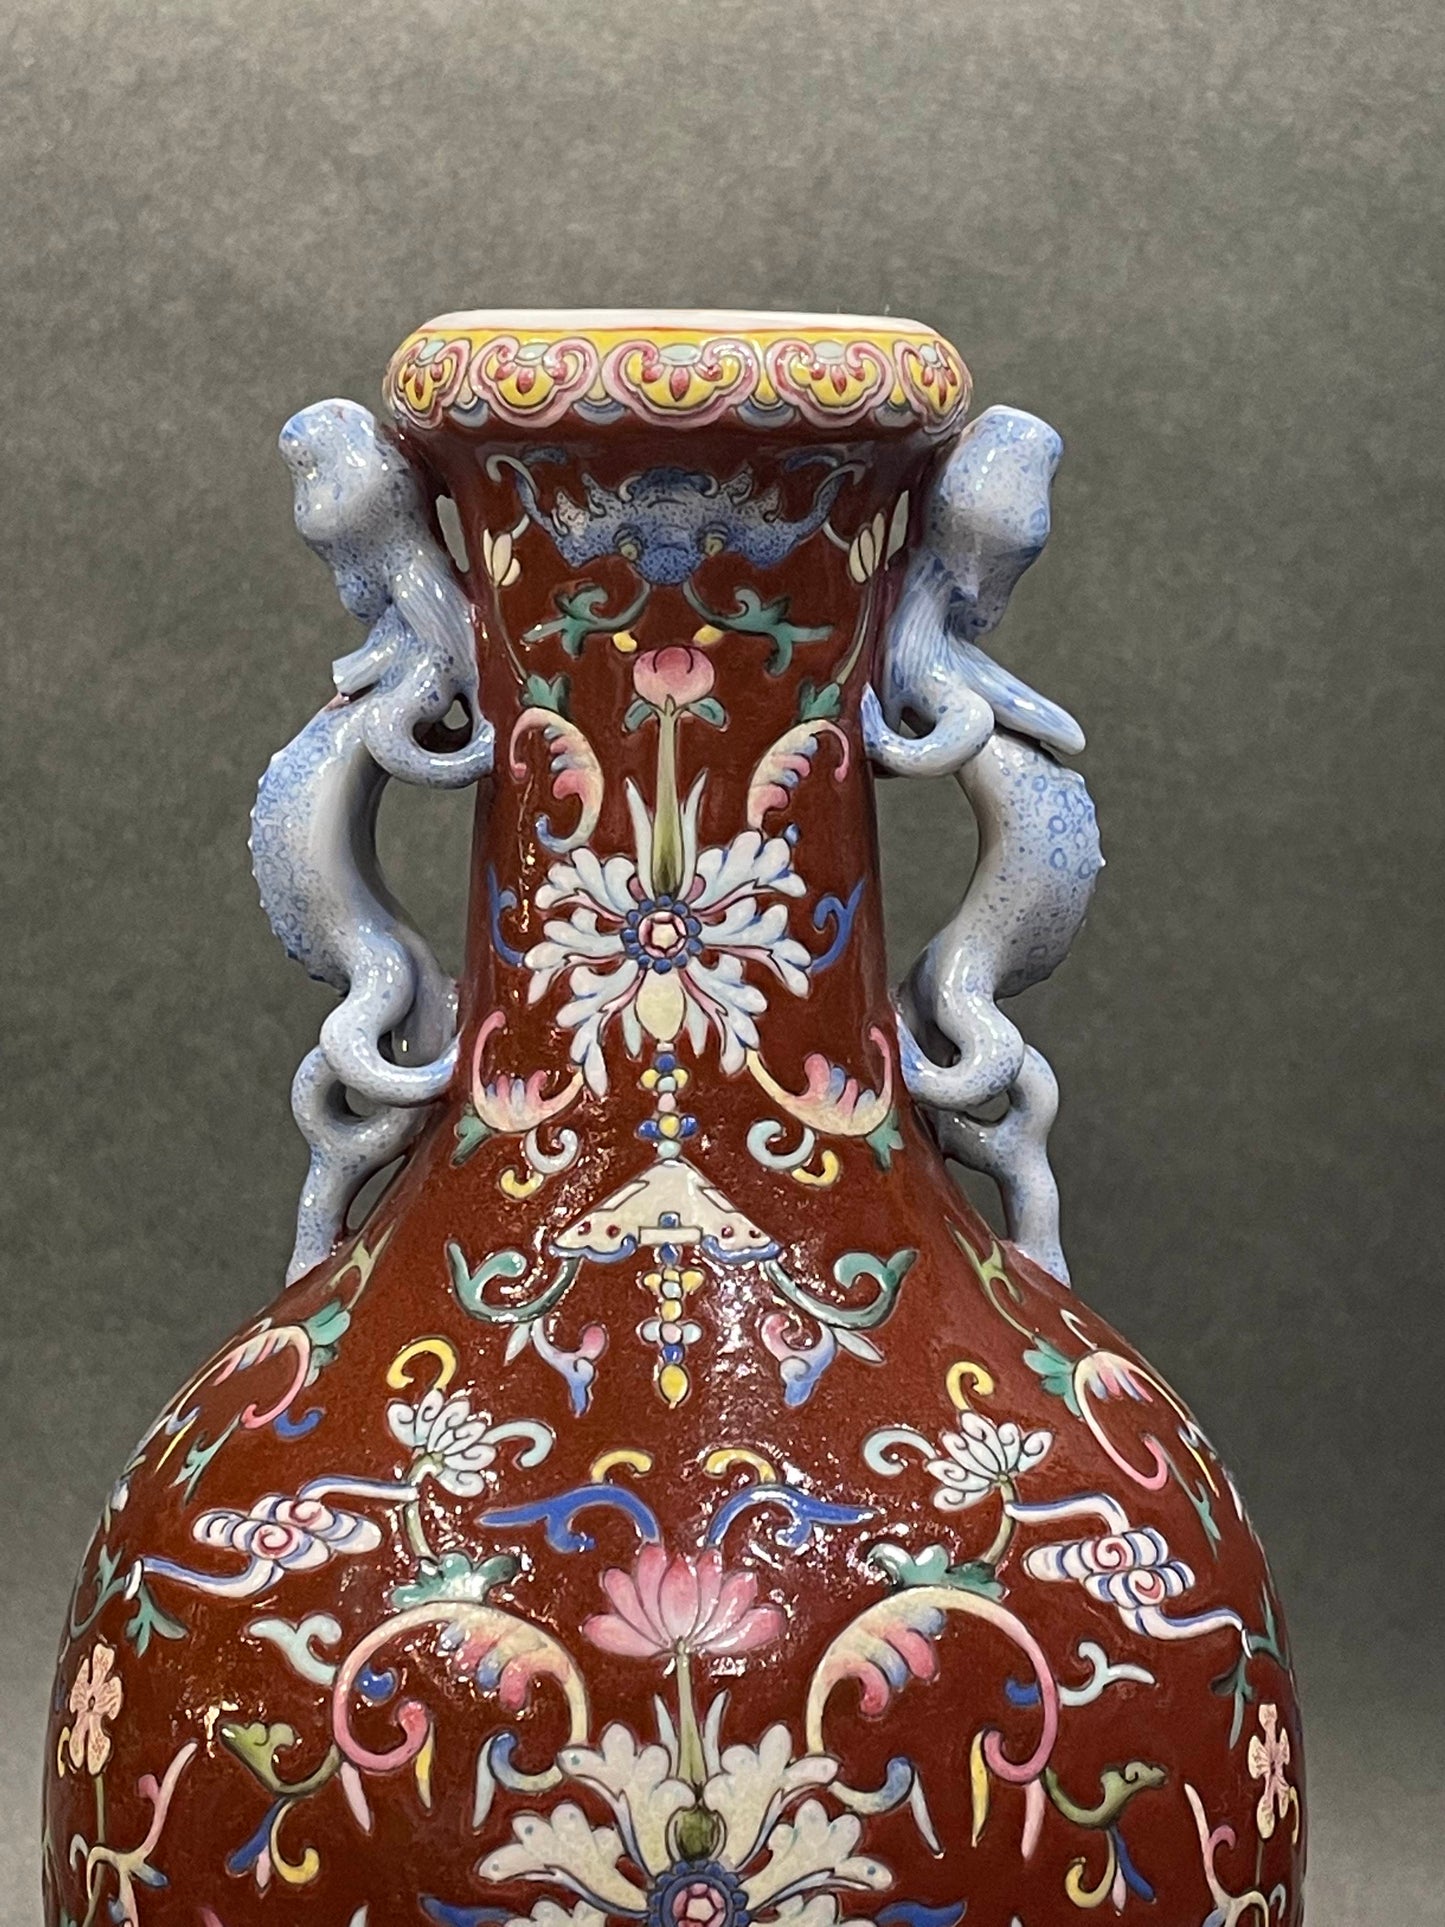 A pair of Vermillion Famille Rose 'Flower' Vases, Republic of China